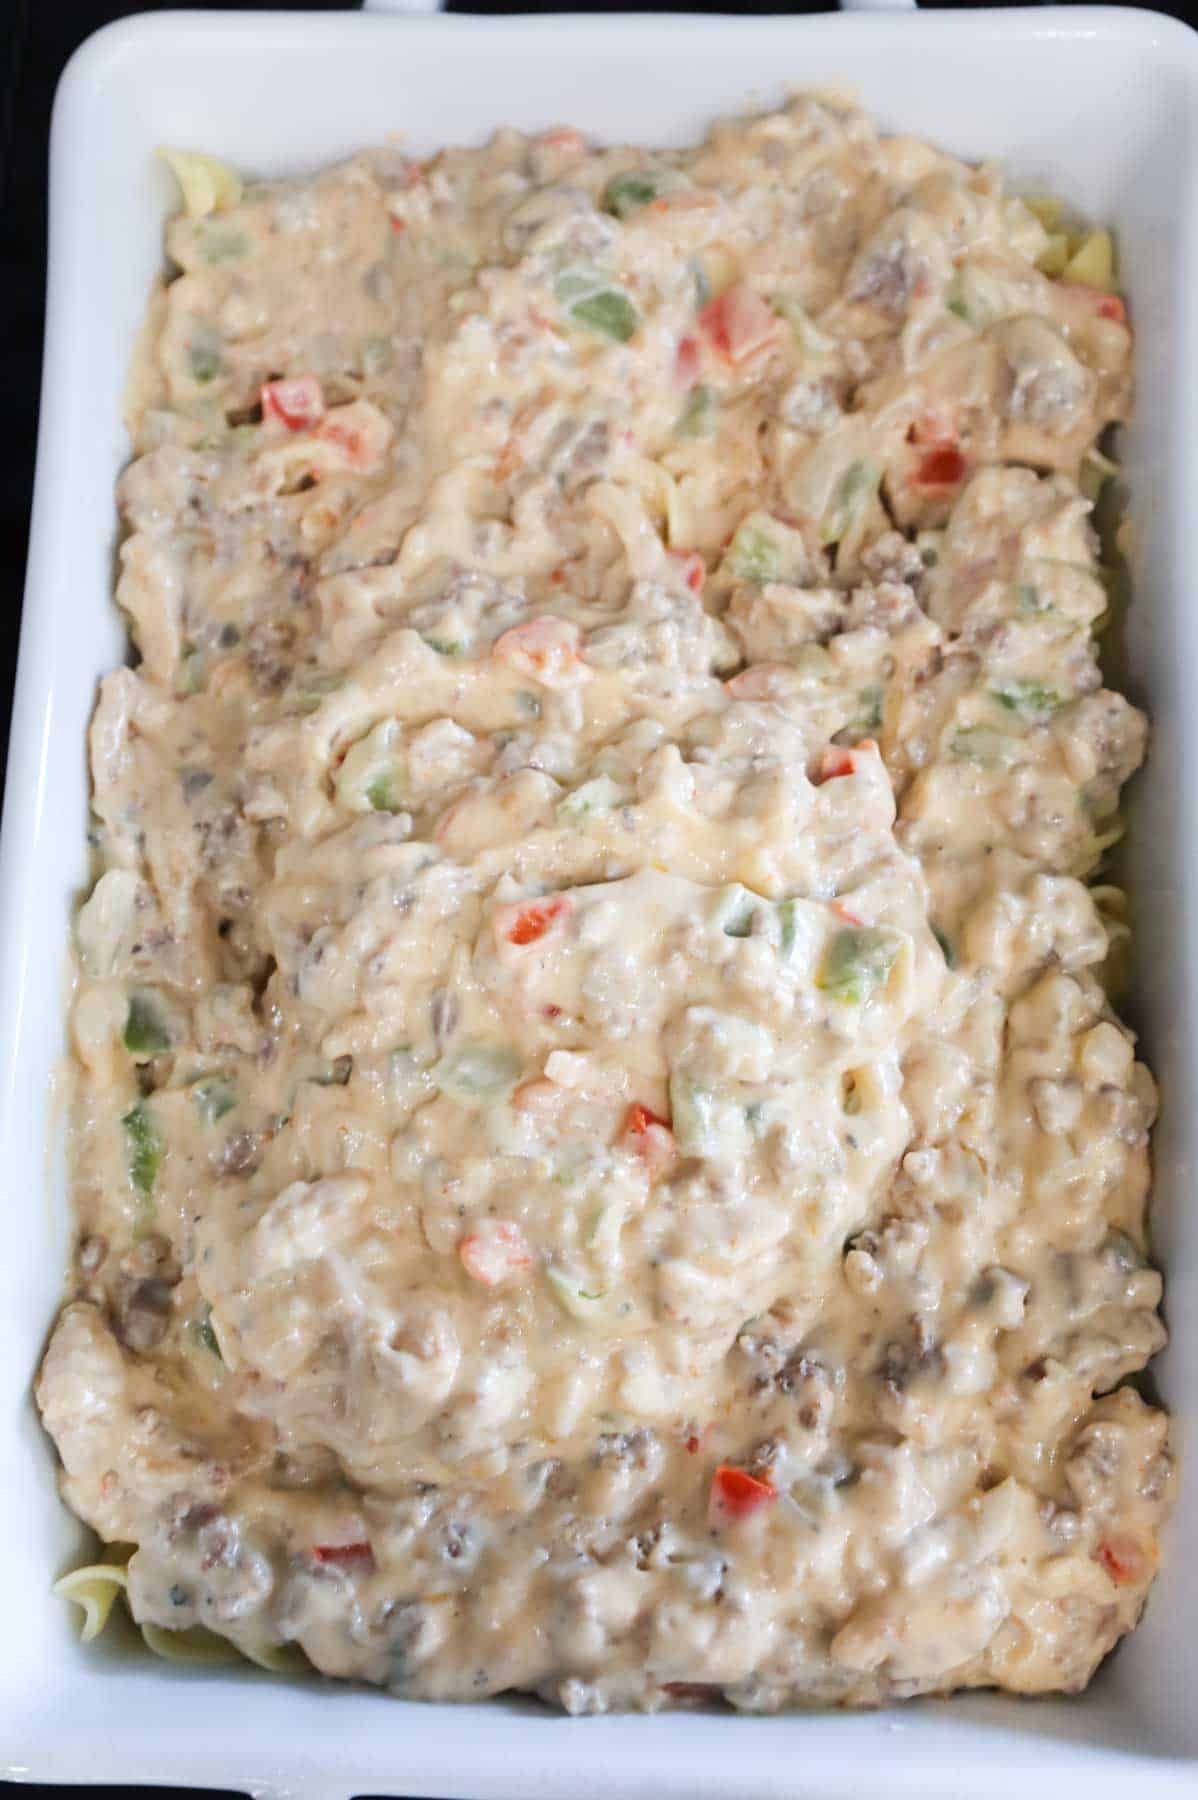 creamy sausage mixture poured over cooked noodles in a baking dish